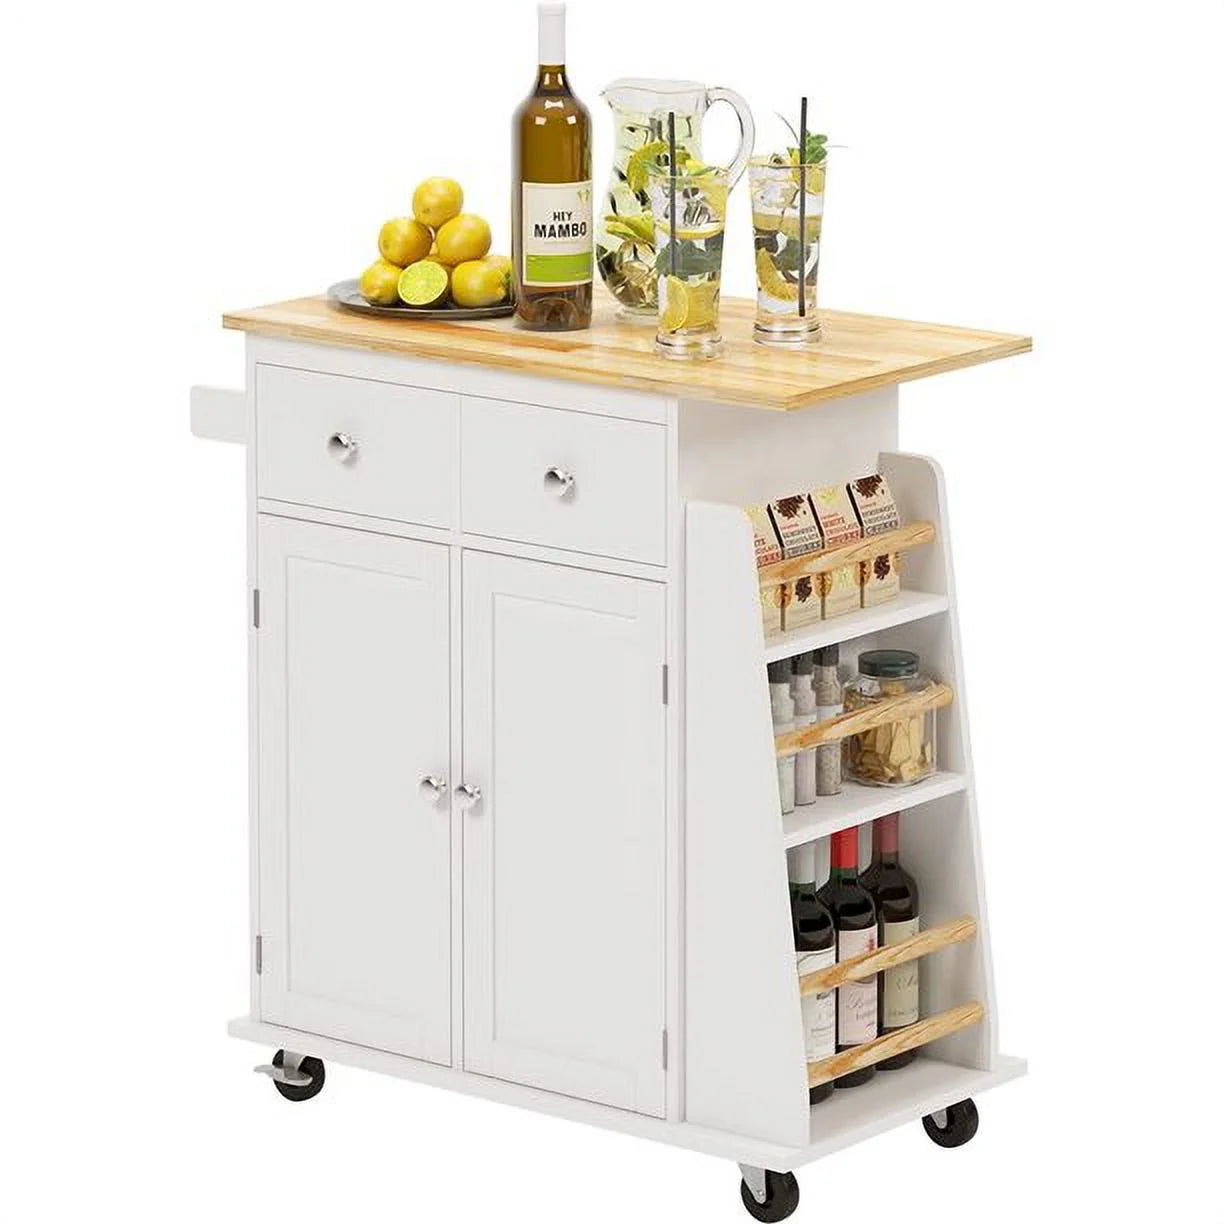 SogesPower Rolling Kitchen Island Cart with Cabinets, Drawers, Spice Rack, Towel Bar, Storage Trolley Cart with Brown Wood Top